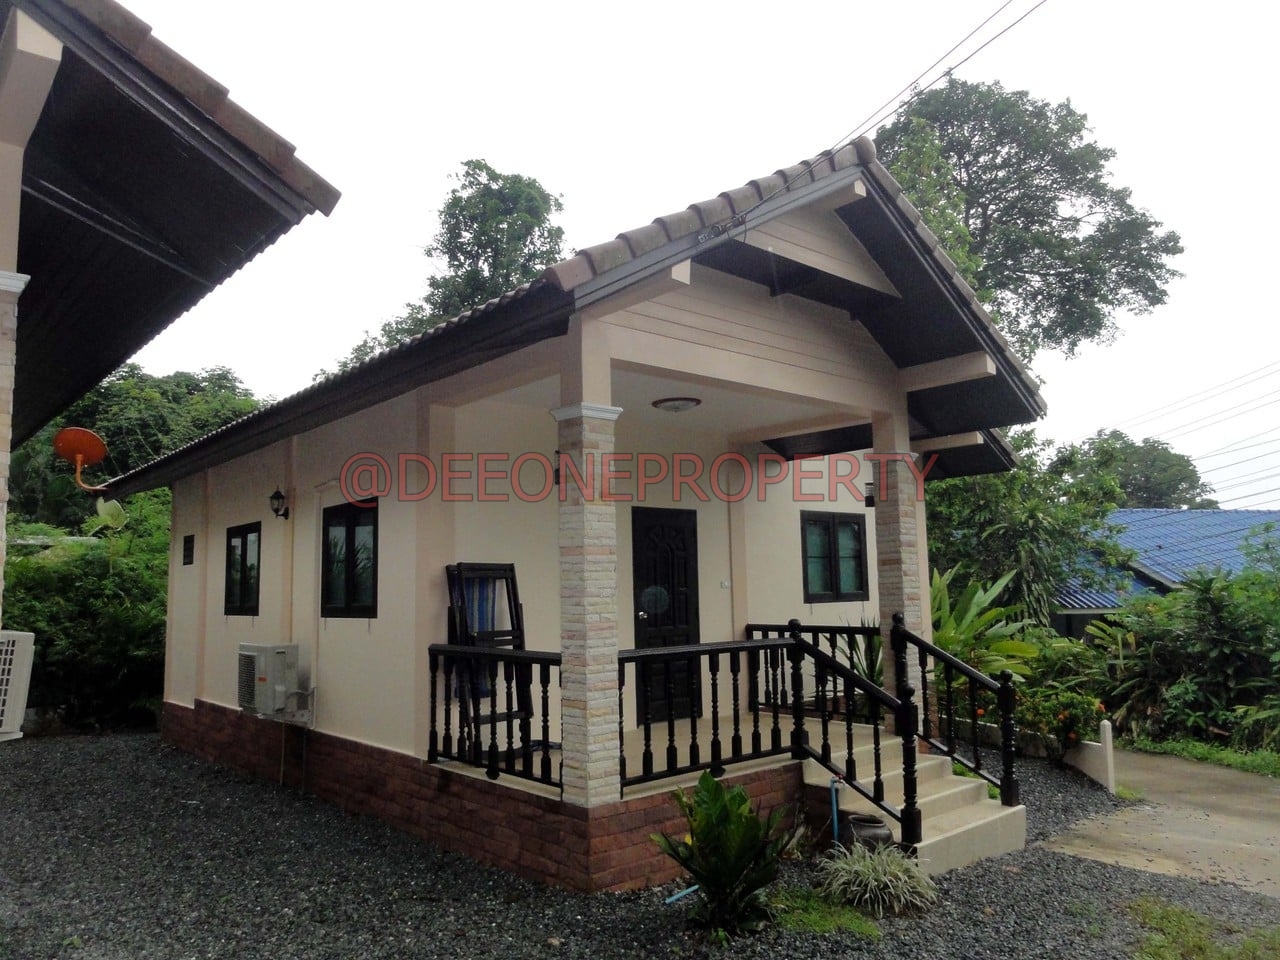 New 2 Bedroom Bungalow for rent – North West Coast, Koh Chang